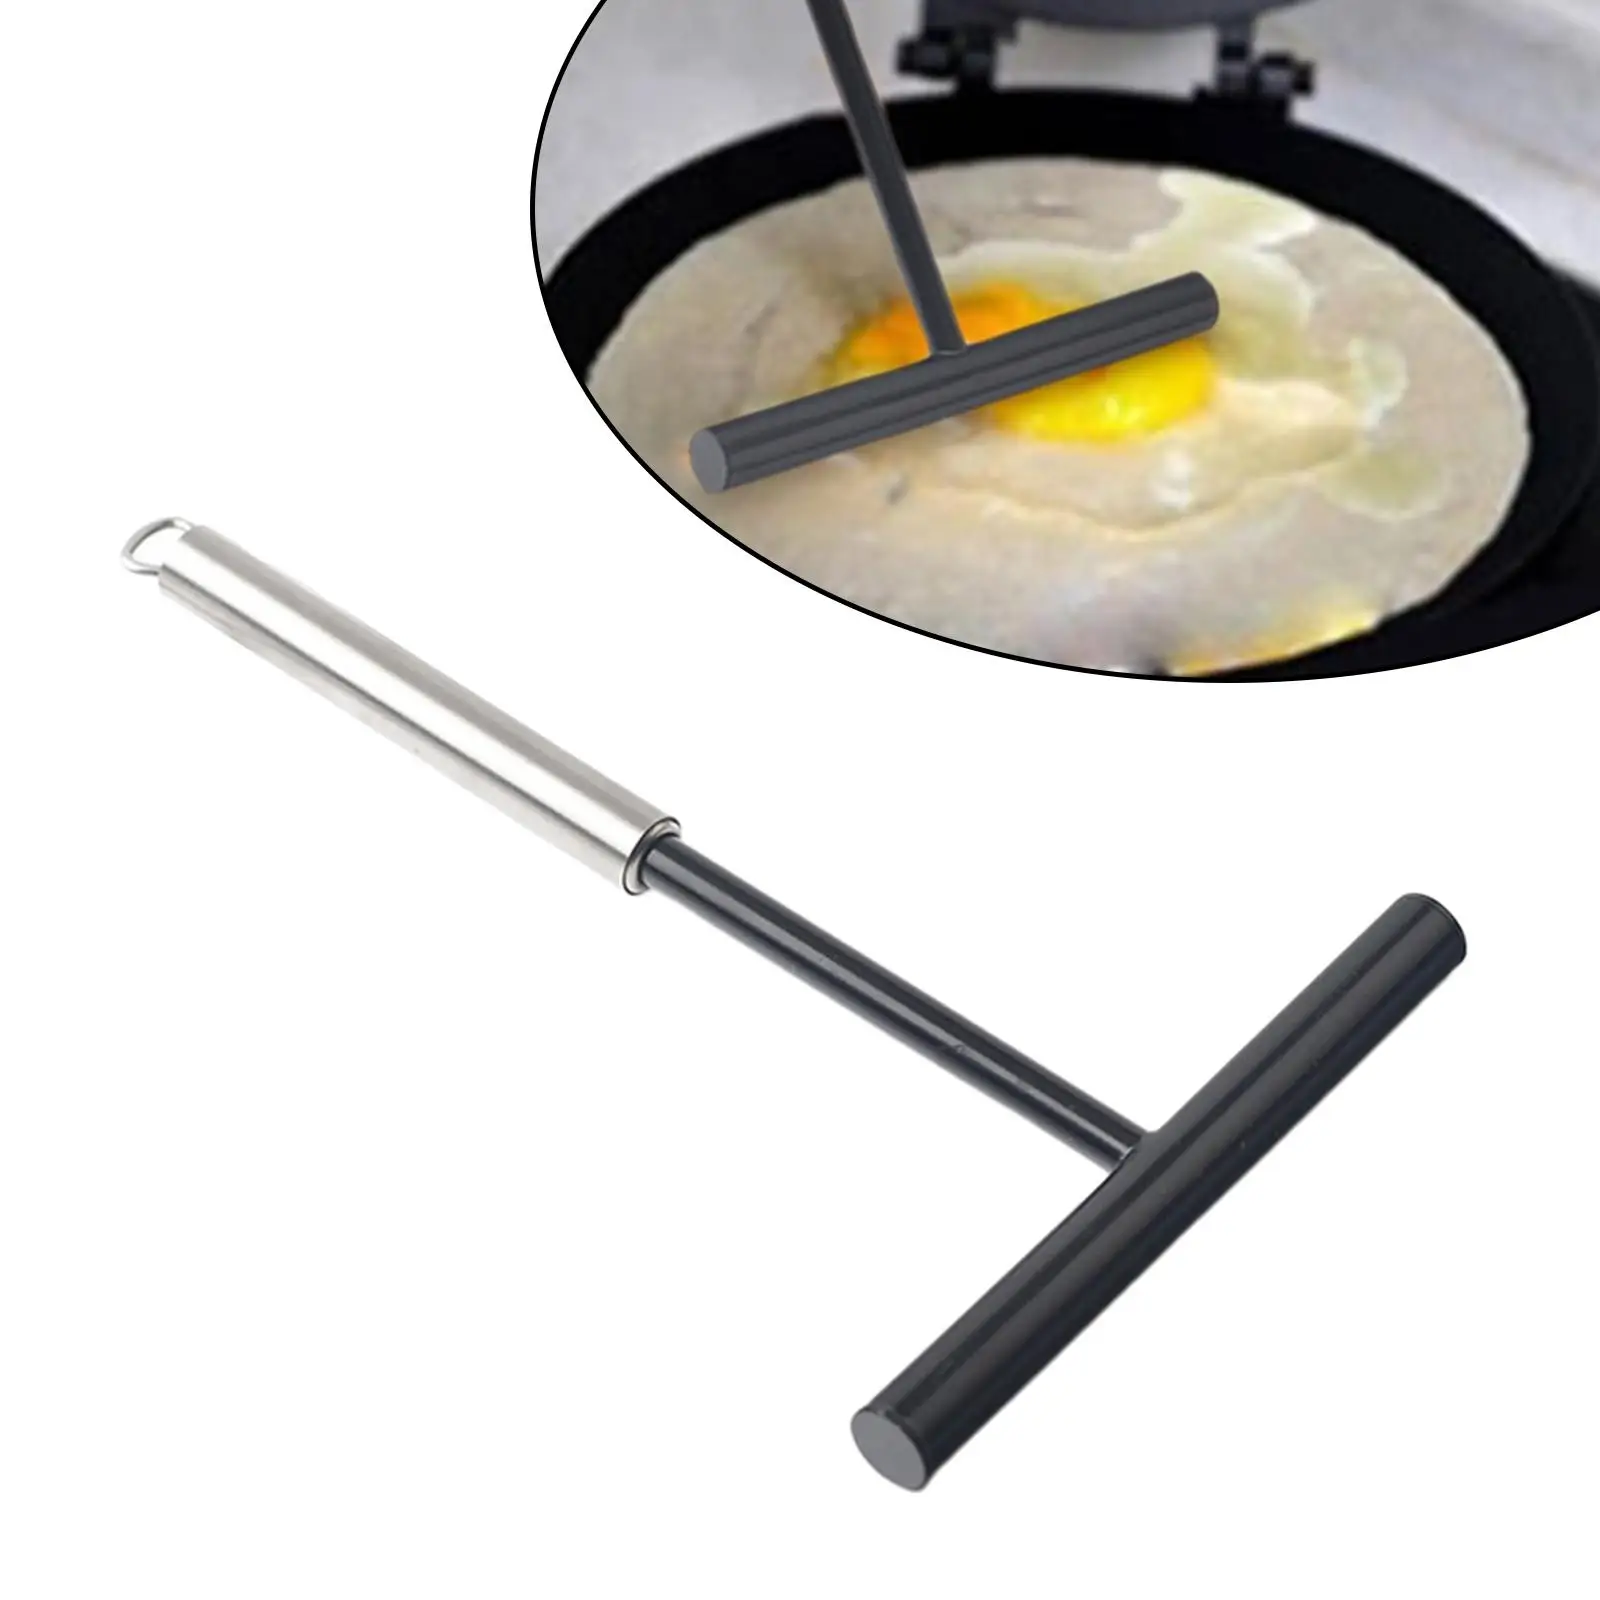 Stainless Steel Crepes Spreader Cooking Tools with Hanging Hole Pancake Fruit Tool Portable Smooth Surface for Kitchen